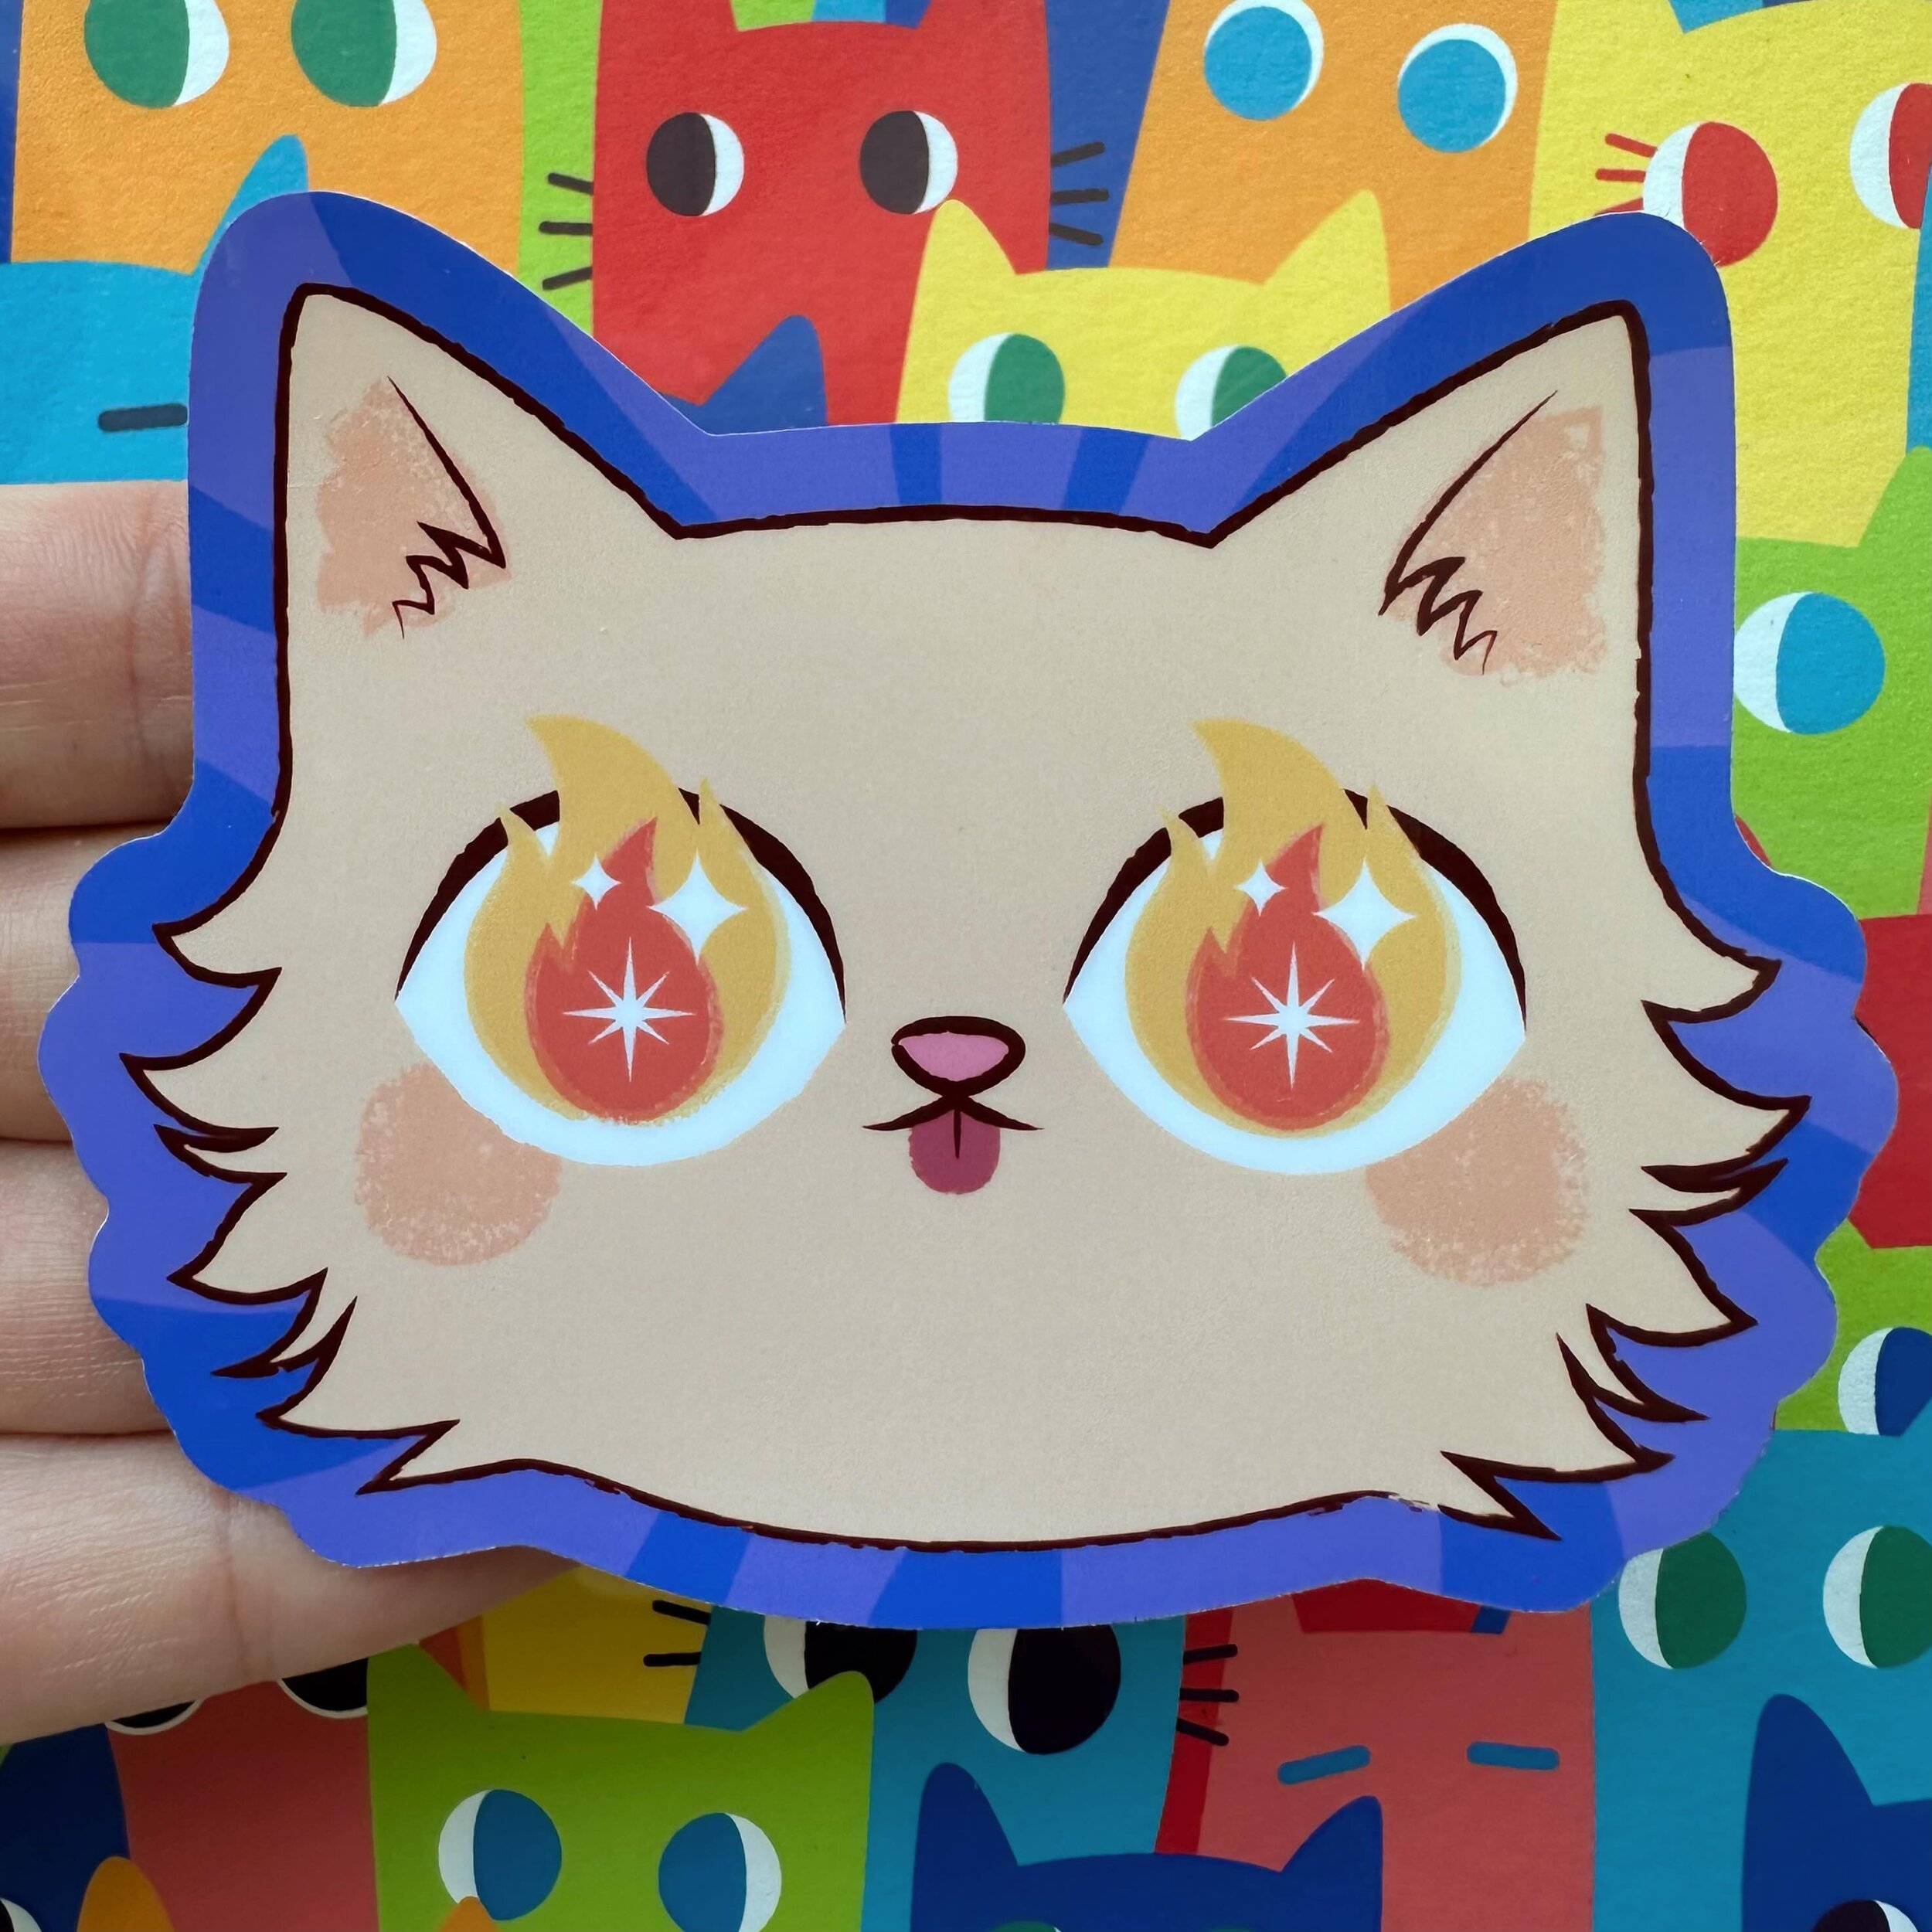 Another thing I made and never took pics of 😂 

This is just the cat face from the bday card I made last summer. But I thought he was cute and deserved a sticker! Minus the party hat.